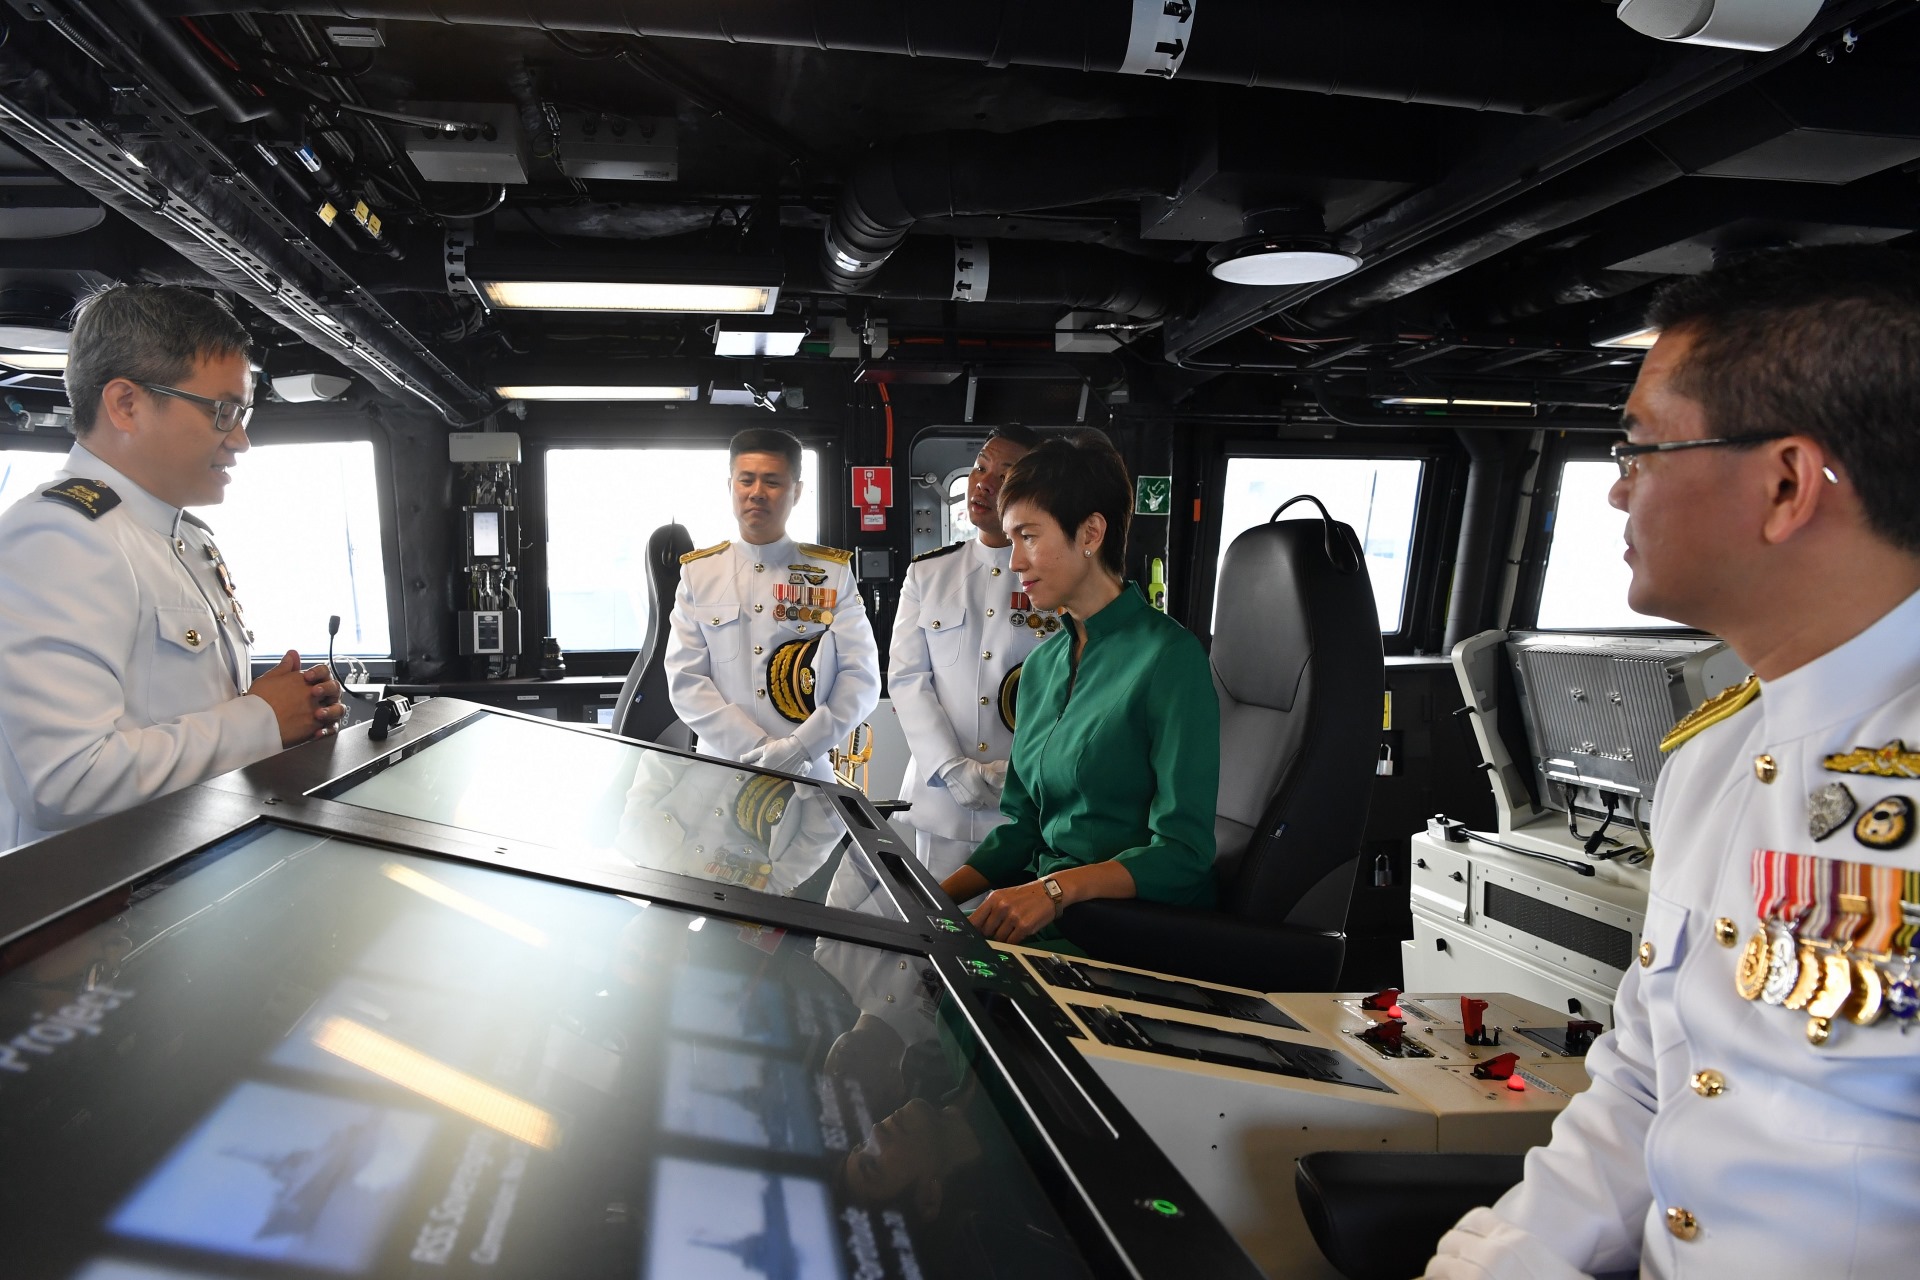 Minister Josephine Teo receiving a brief at RSS Dauntless' Integrated Command Centre, accompanied by the Chief of Navy Rear-Admiral Lew Chuen Hong